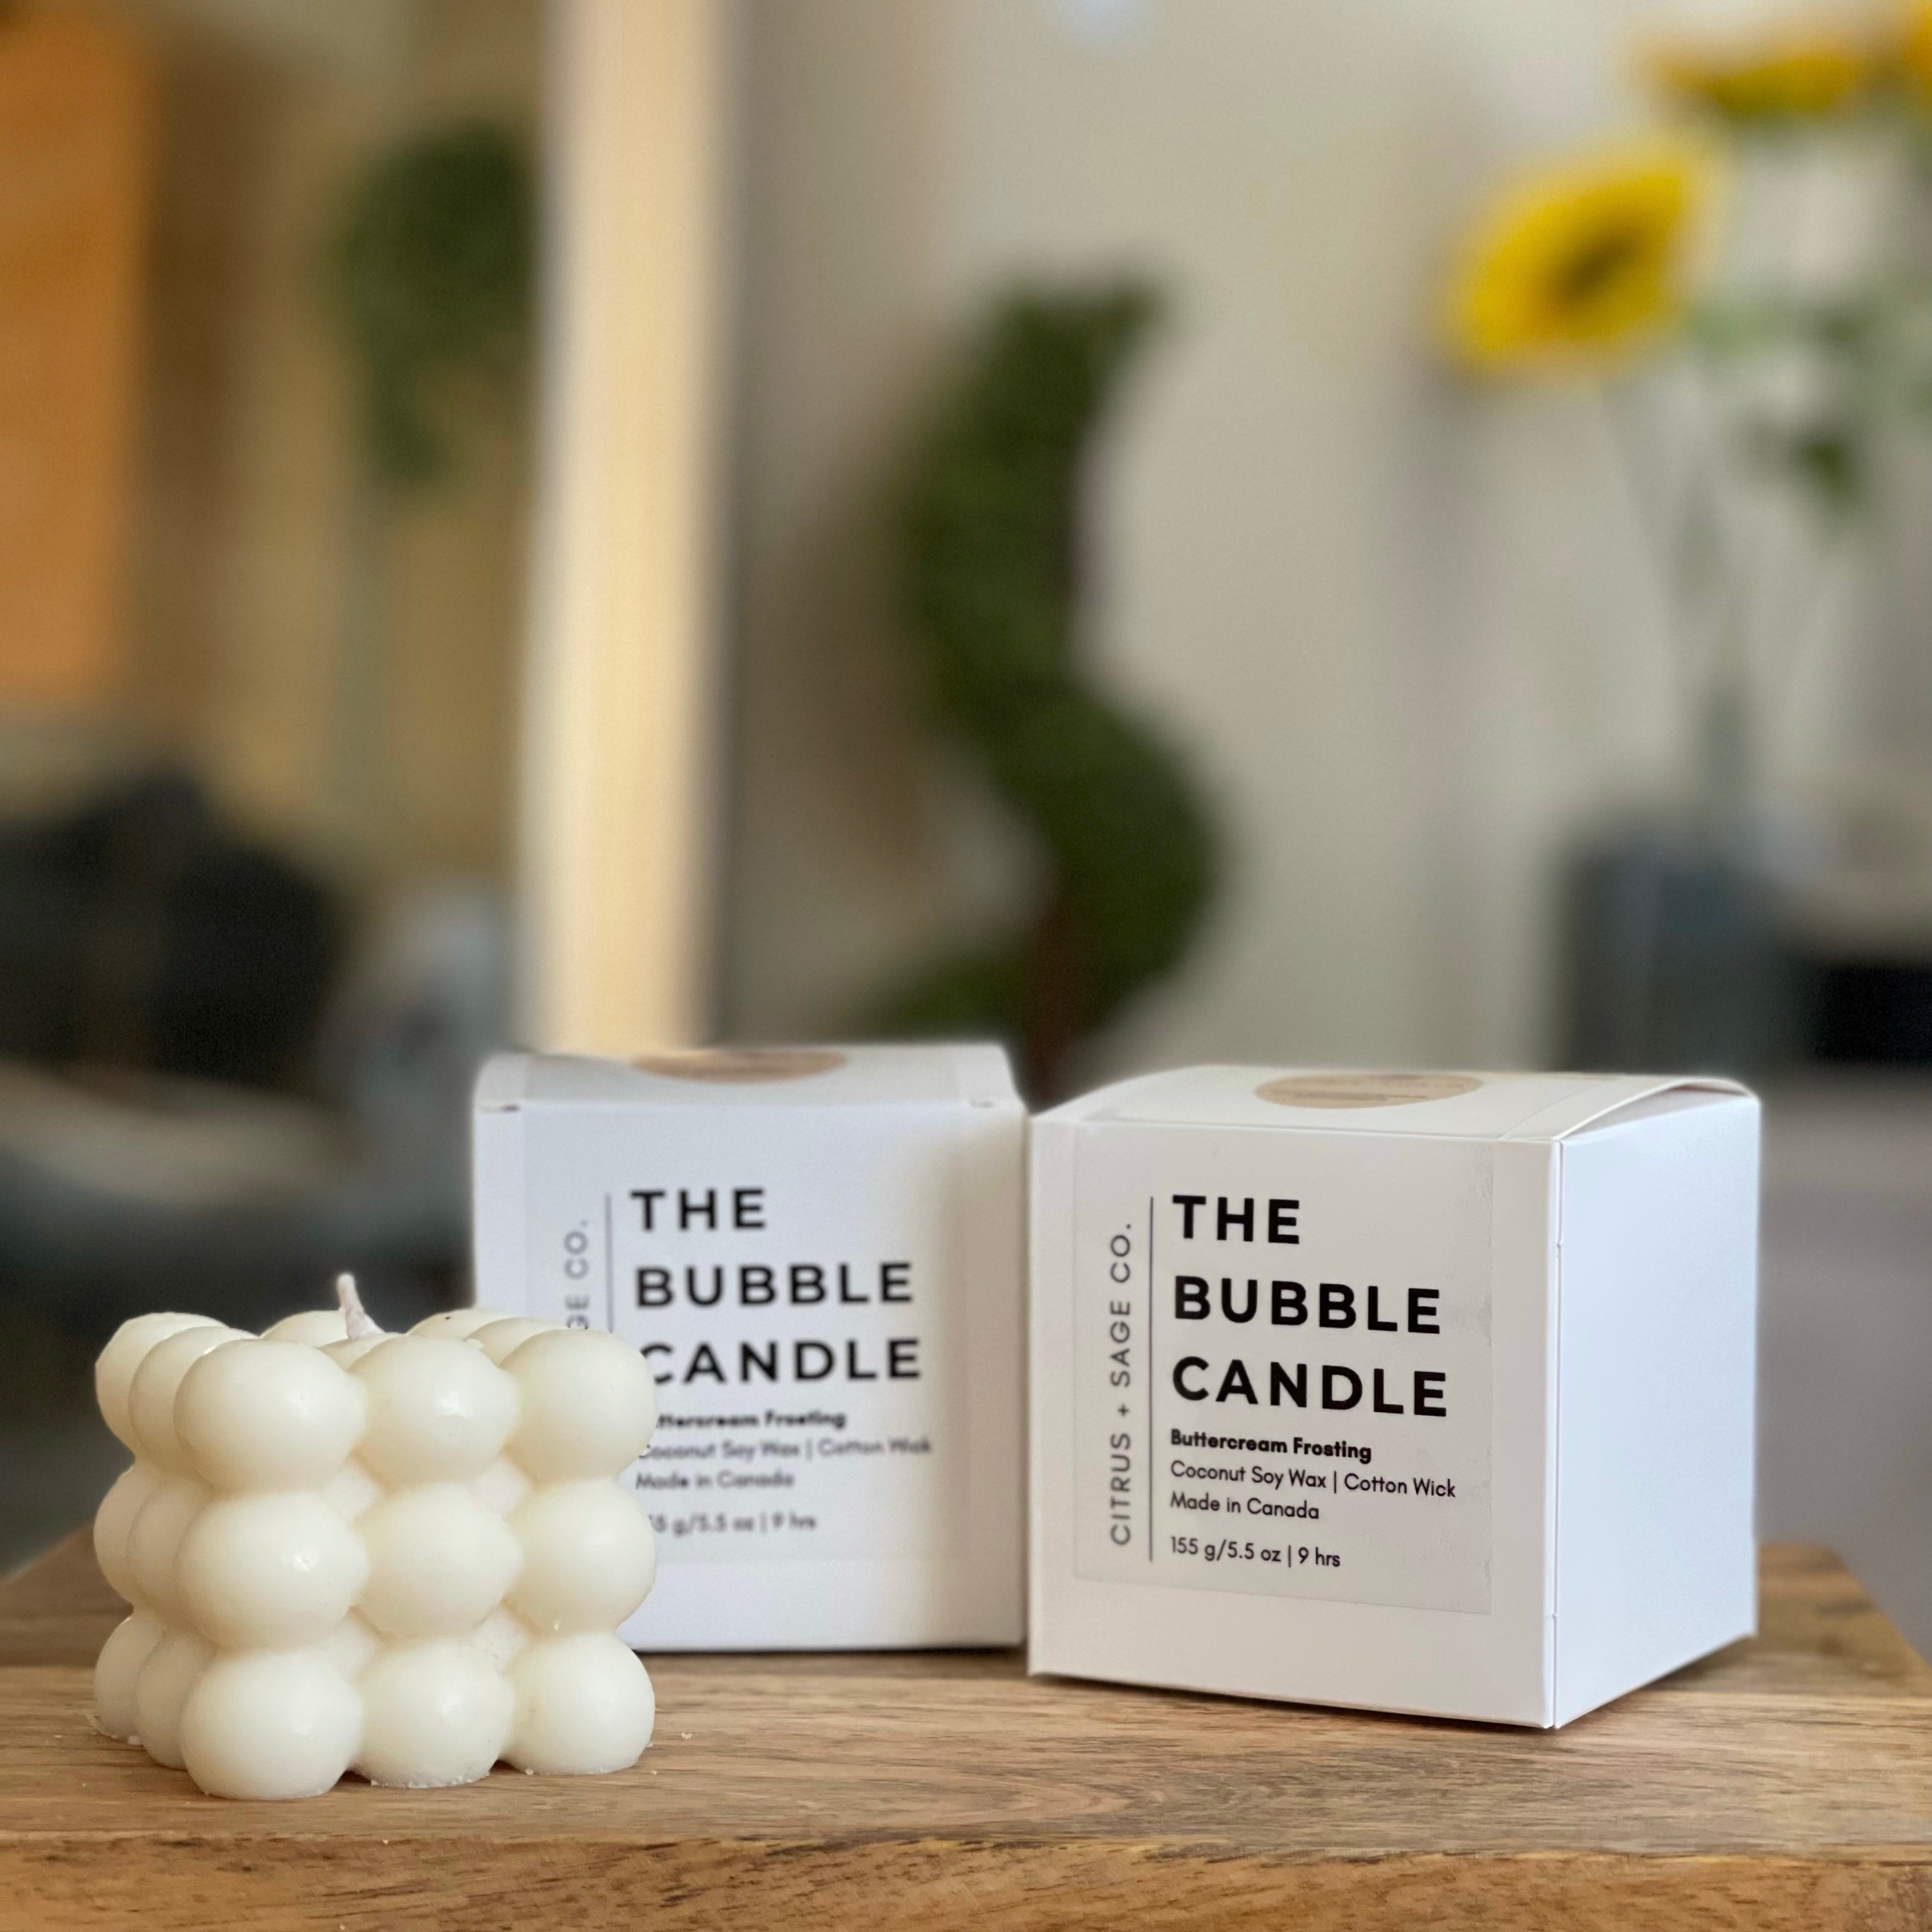 The Bubble Candle.